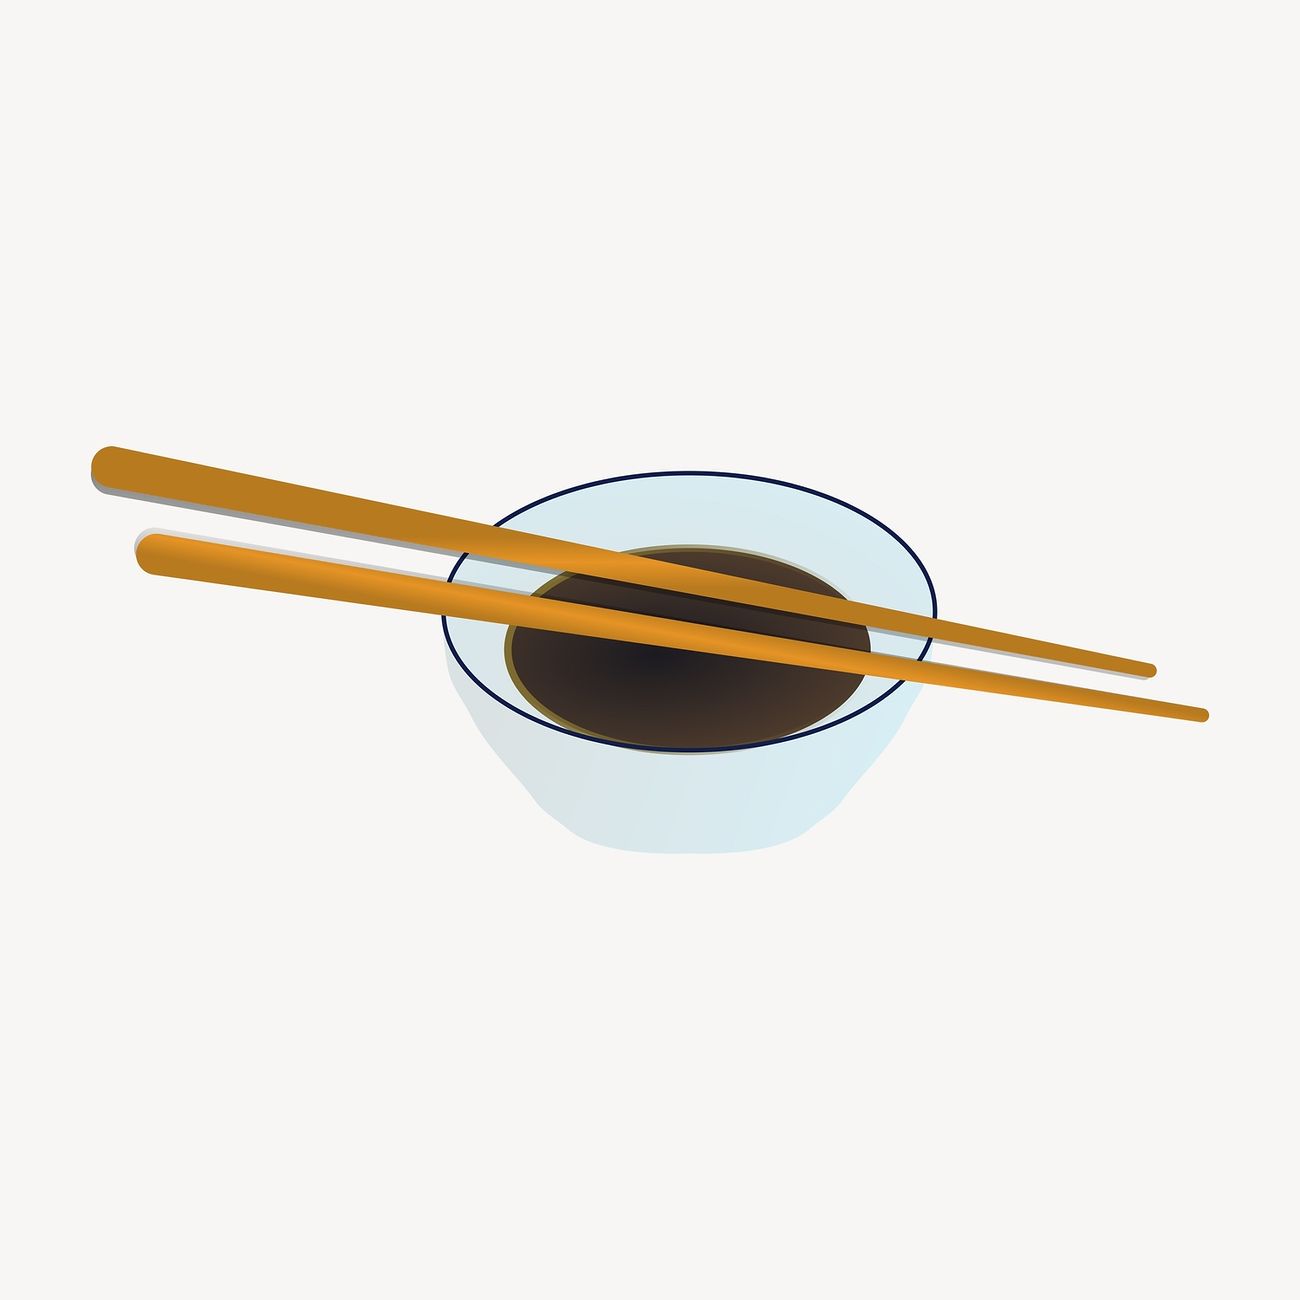 Soy sauce clipart, Japanese food